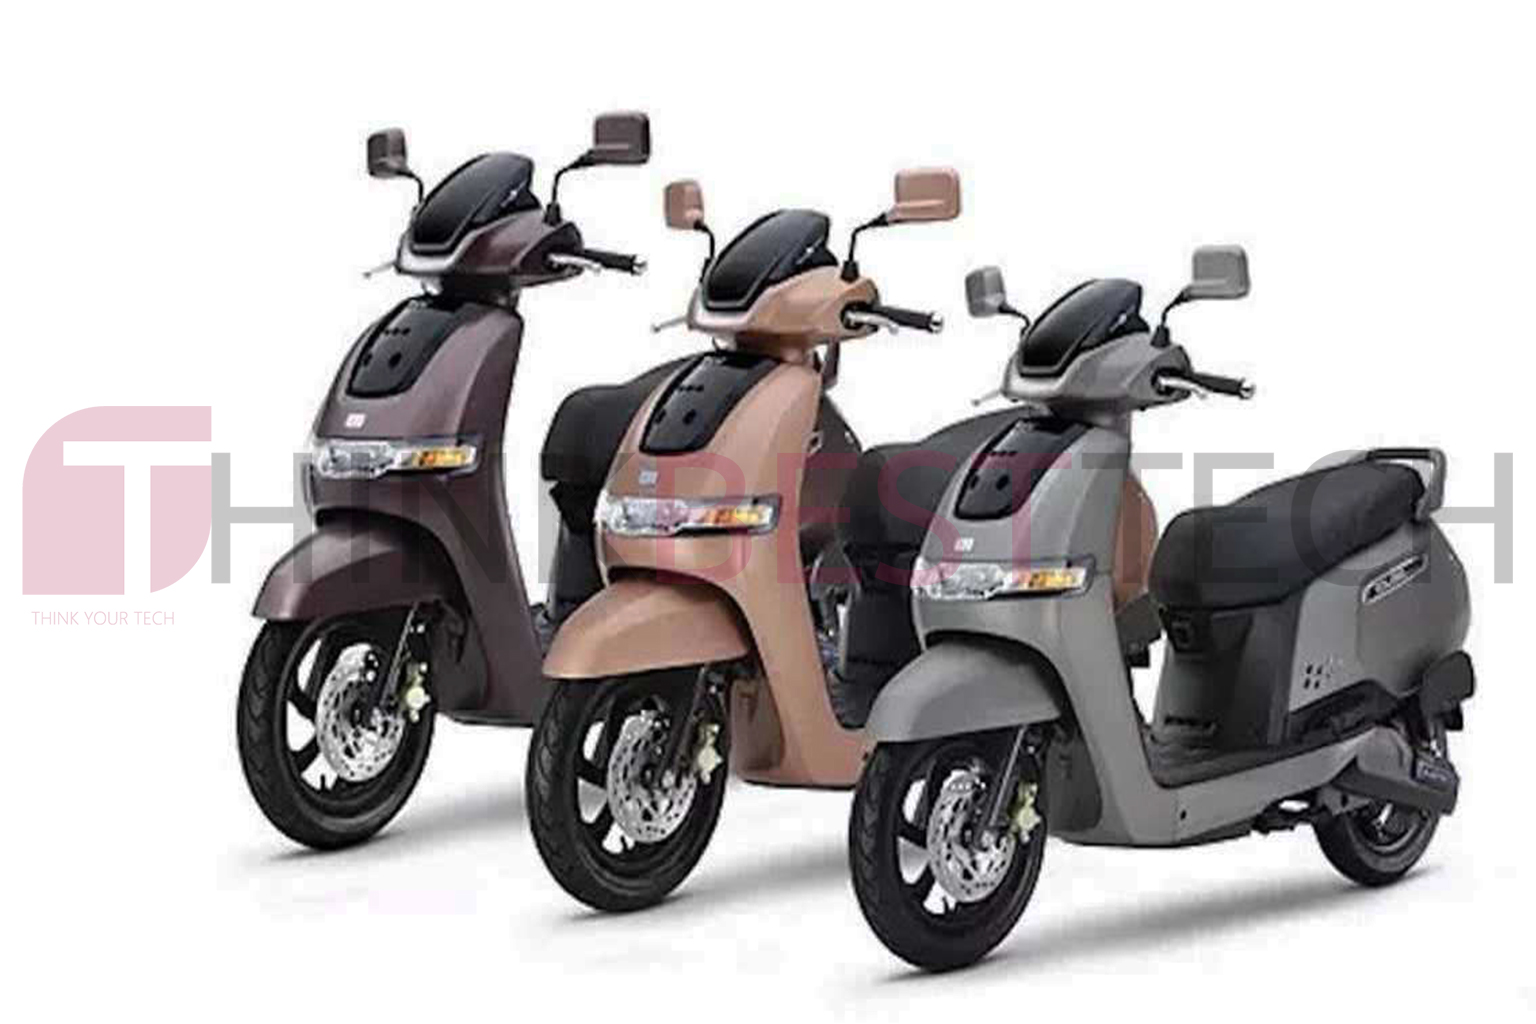 TVS Increase Product of iQube Electric Scooter